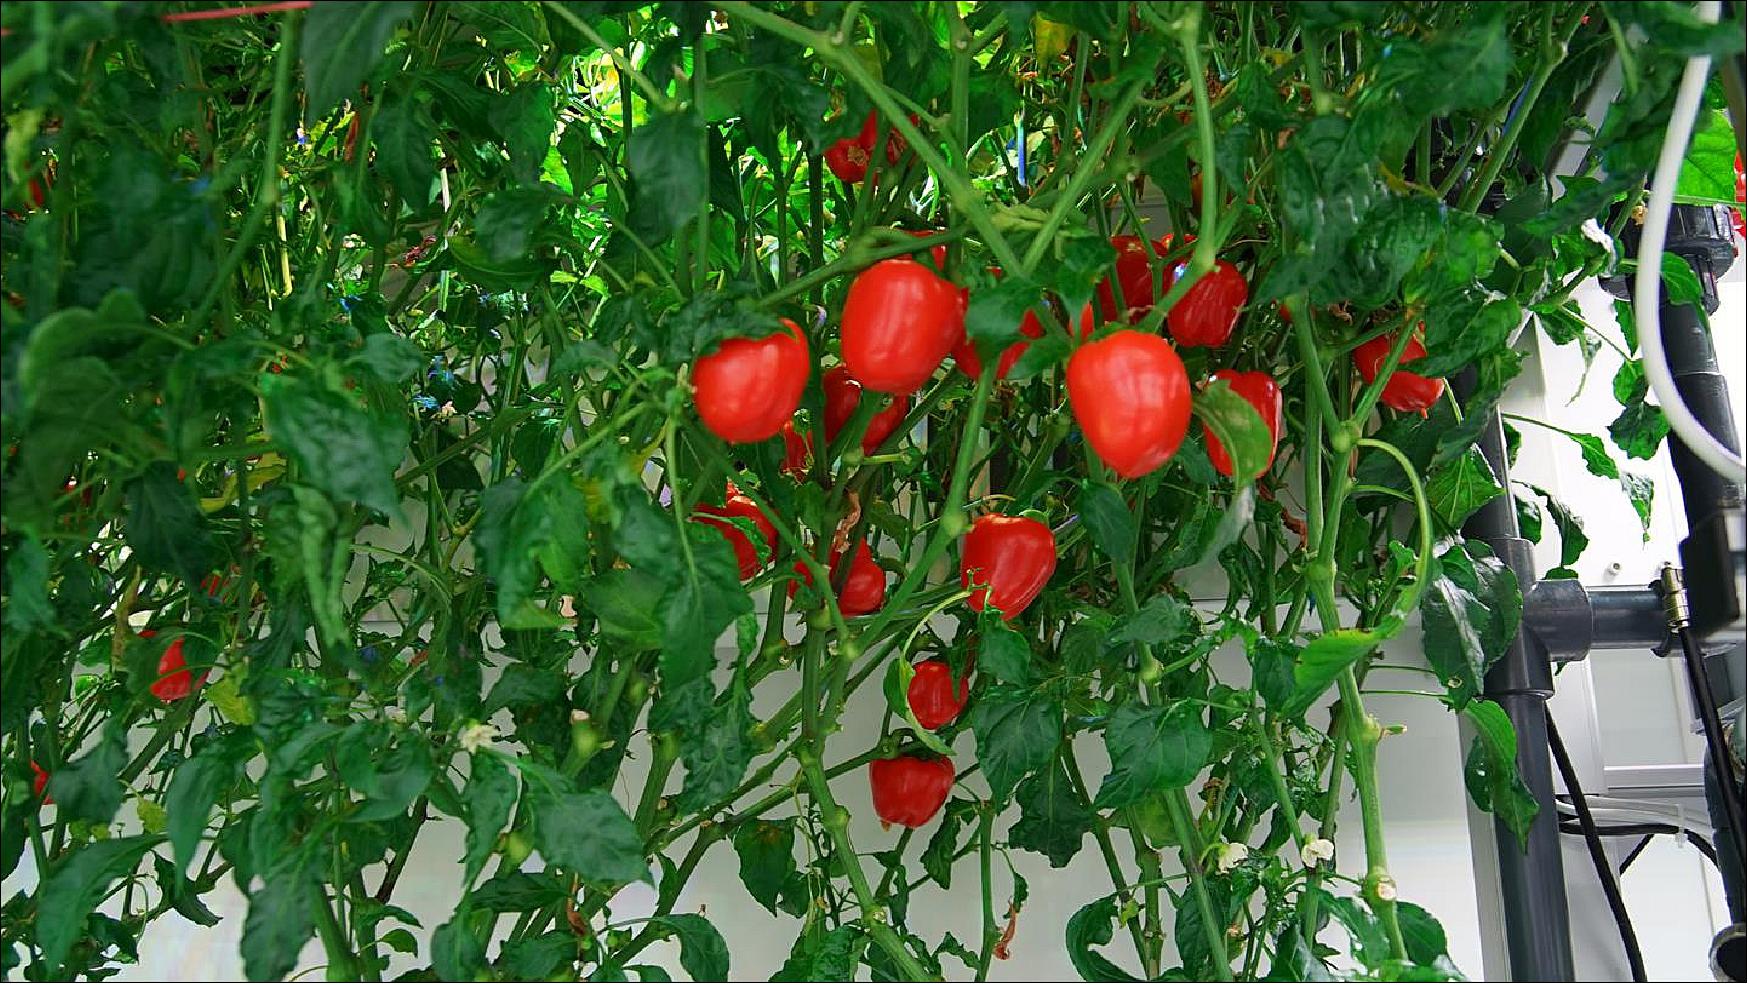 Figure 23: Paprika plants in the greenhouse (image credit: DLR)